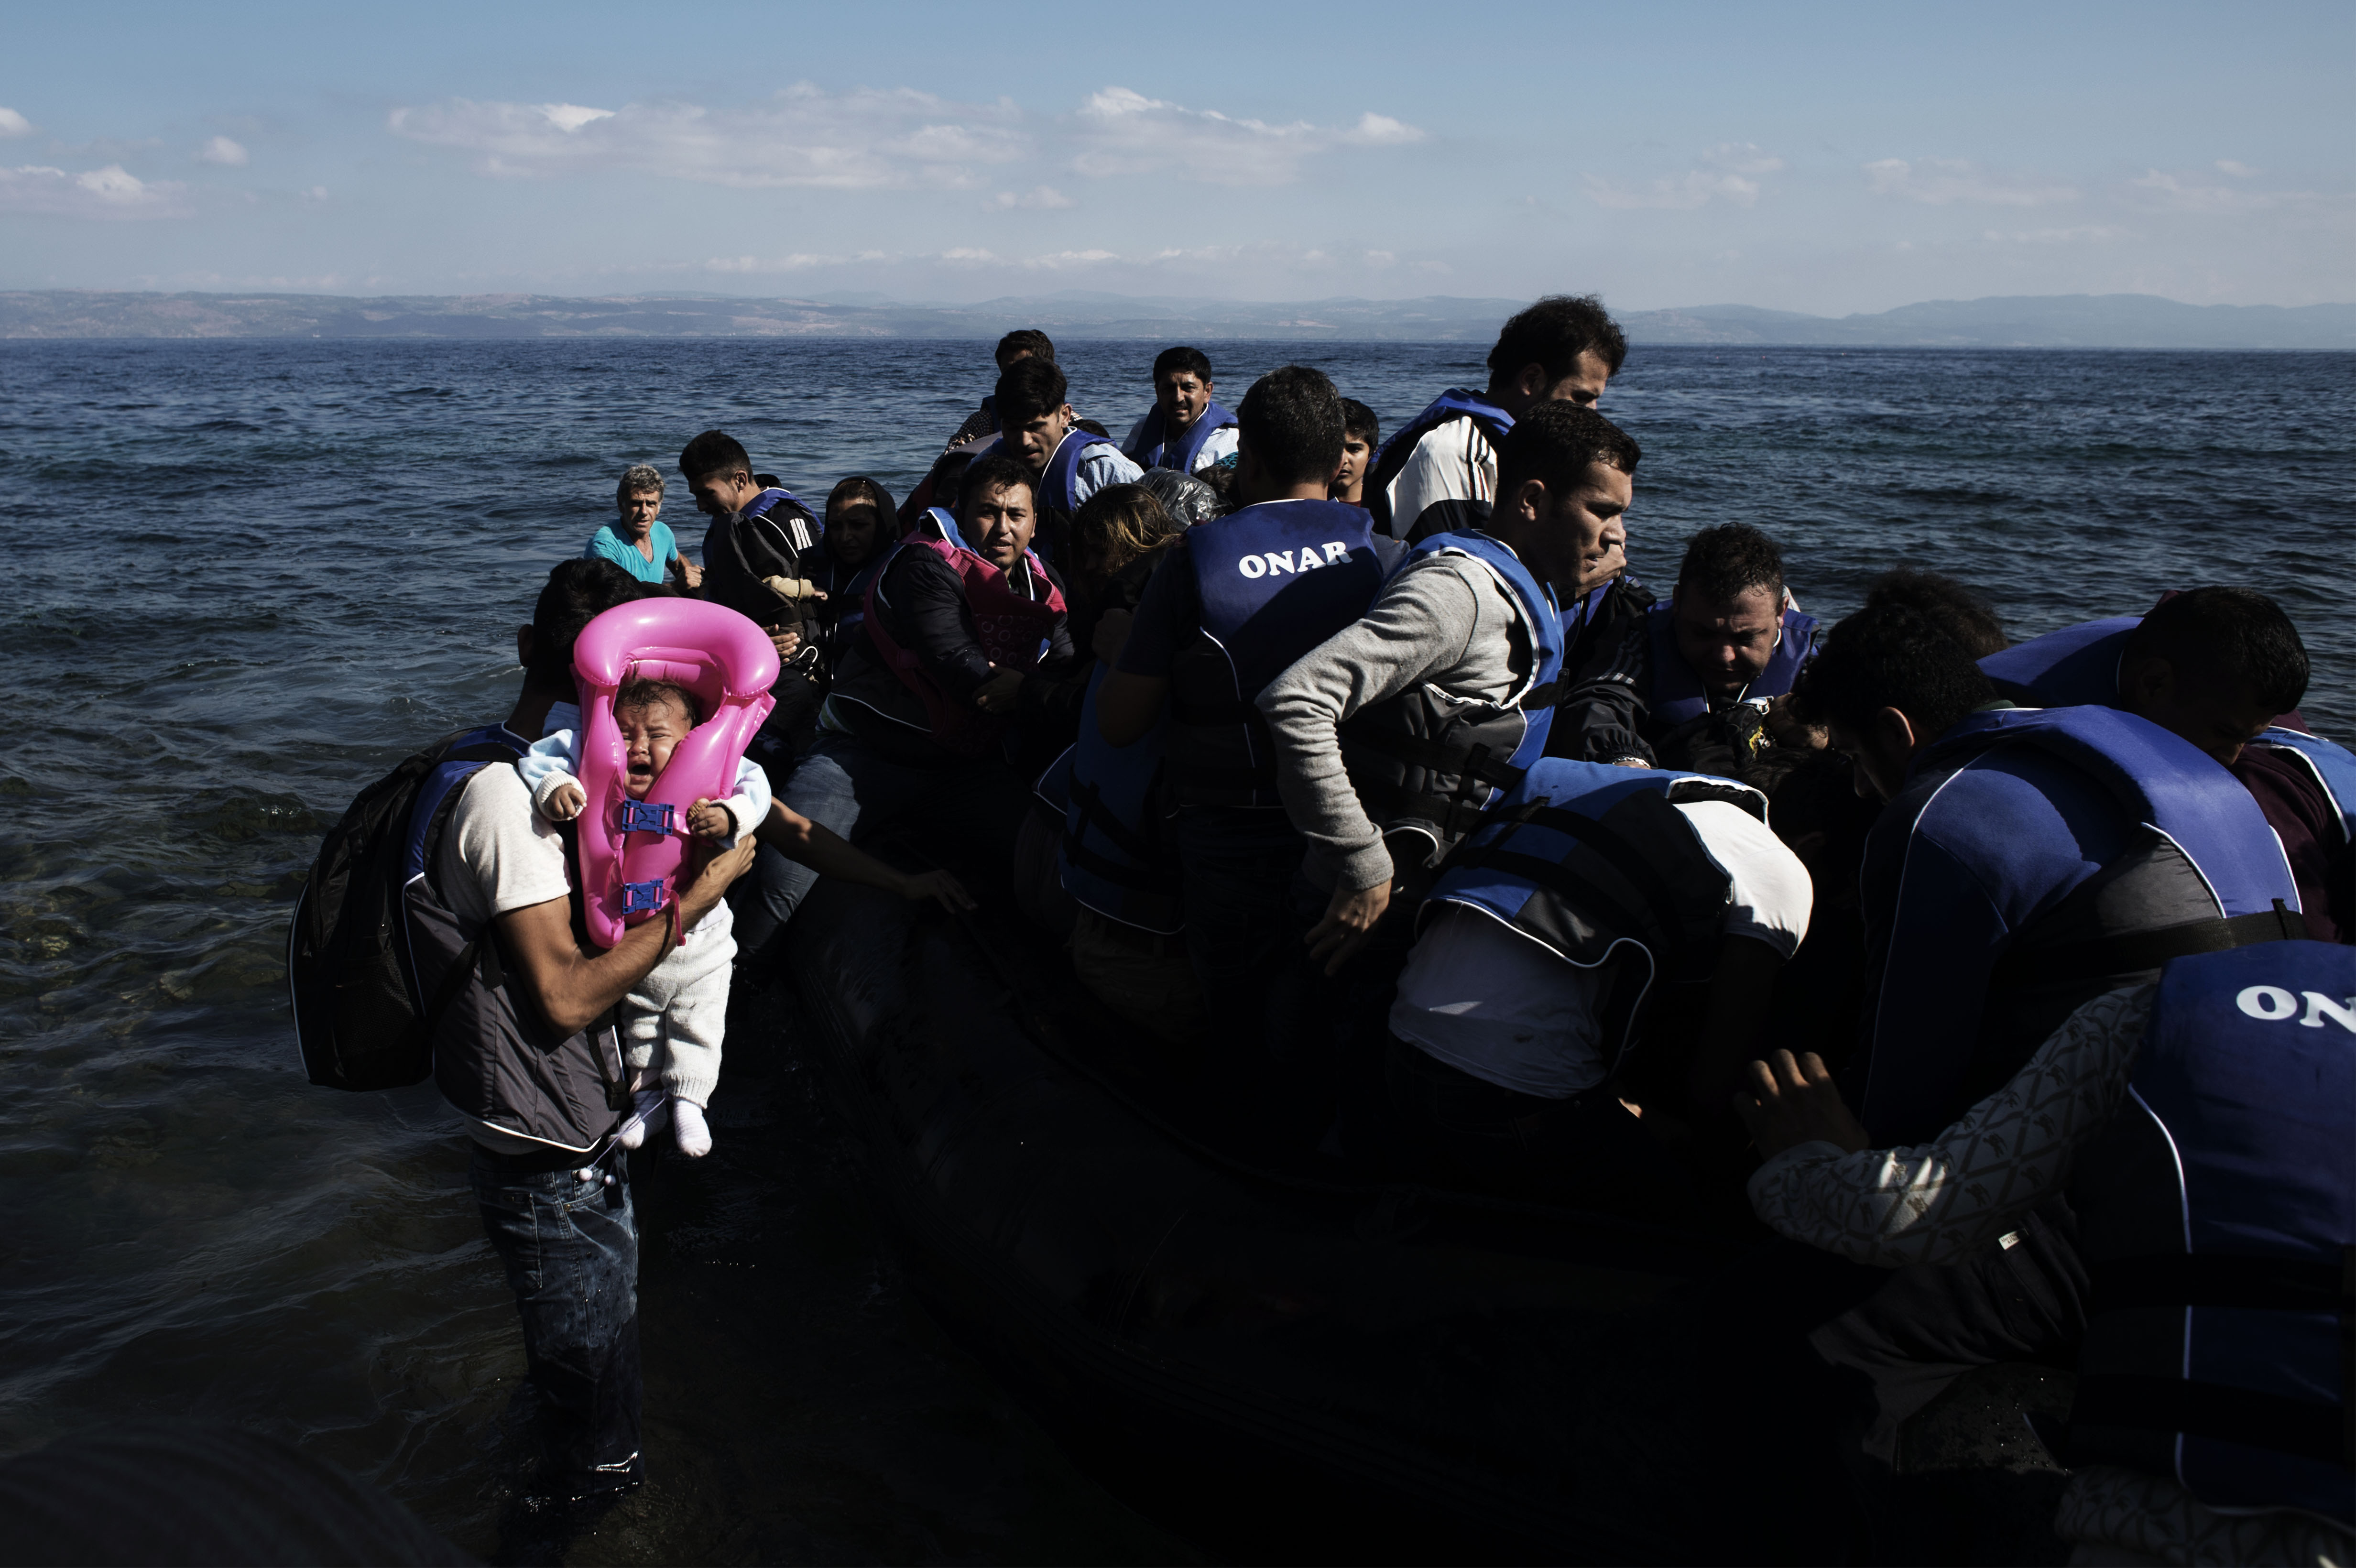 Asylum-seekers from the Syrian Arab Republic, including a crying infant, begin to disembark a large raft as they arrive on the shores of the island of Lesbos, in the North Aegean region on Sept. 14, 2015.